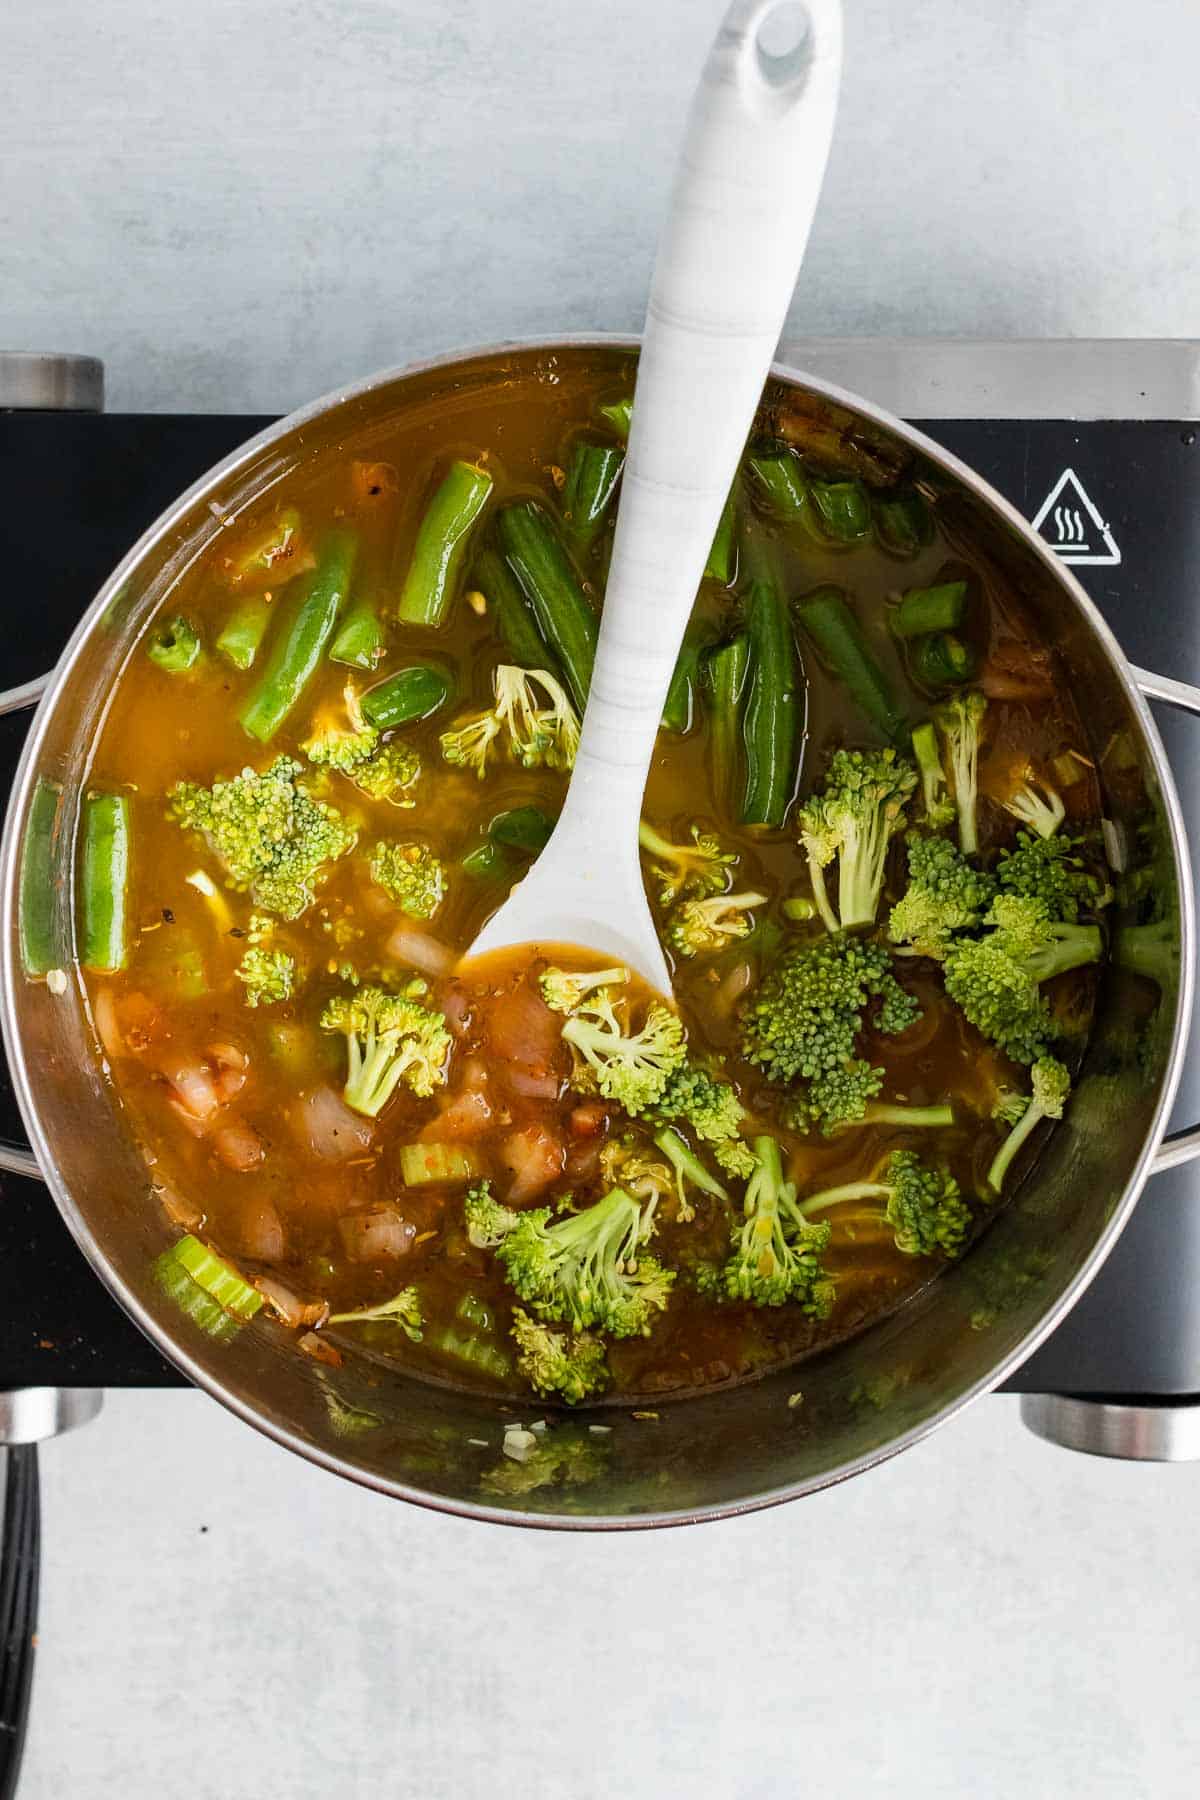 Vegetable stock, broccoli, and green beans added to the sauce pan, as seen from above